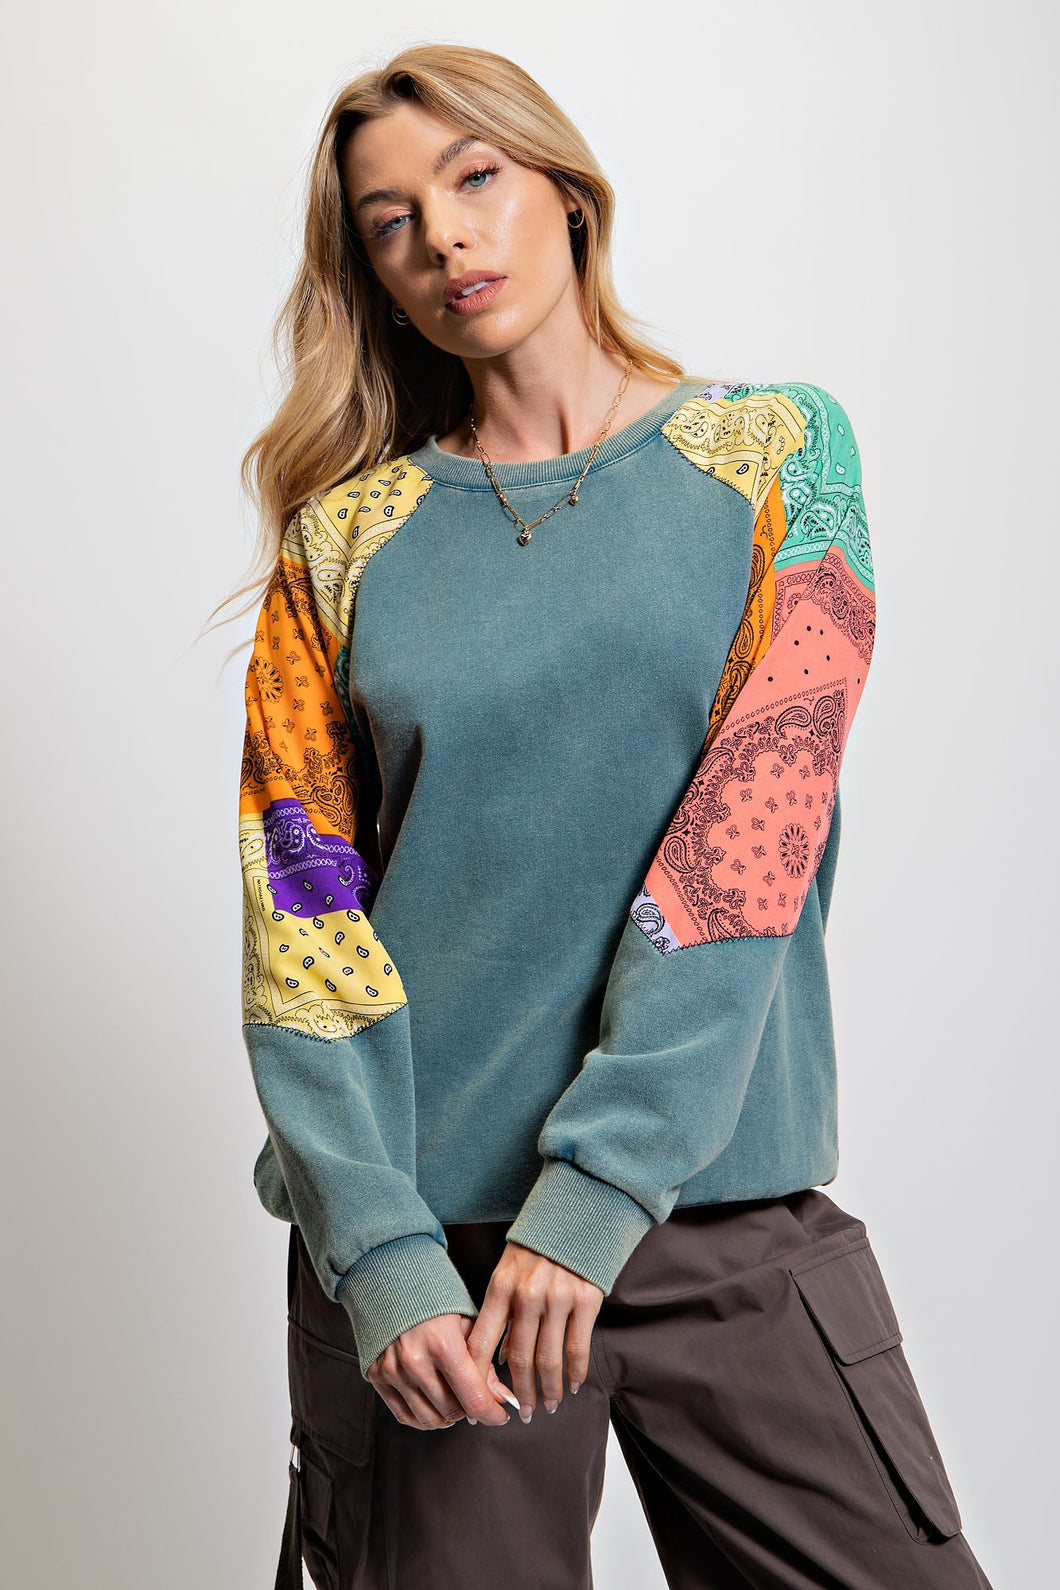 Easel Mixed Print Shoulders Terry Knit Pullover Top in Teal Shirts & Tops Easel   